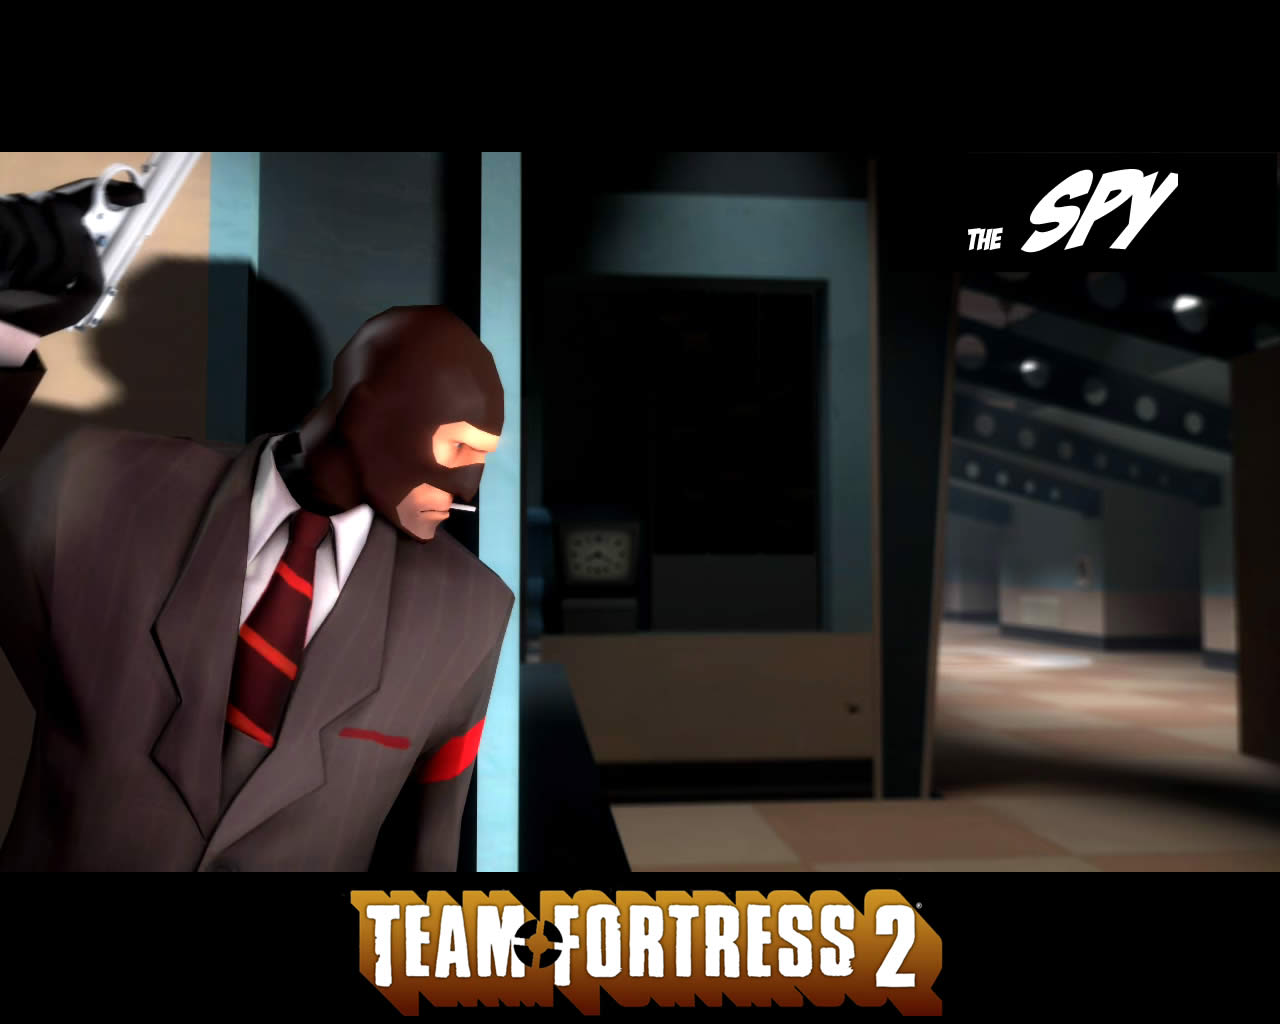 Free download wallpaper Team Fortress 2, Video Game, Spy (Team Fortress) on your PC desktop